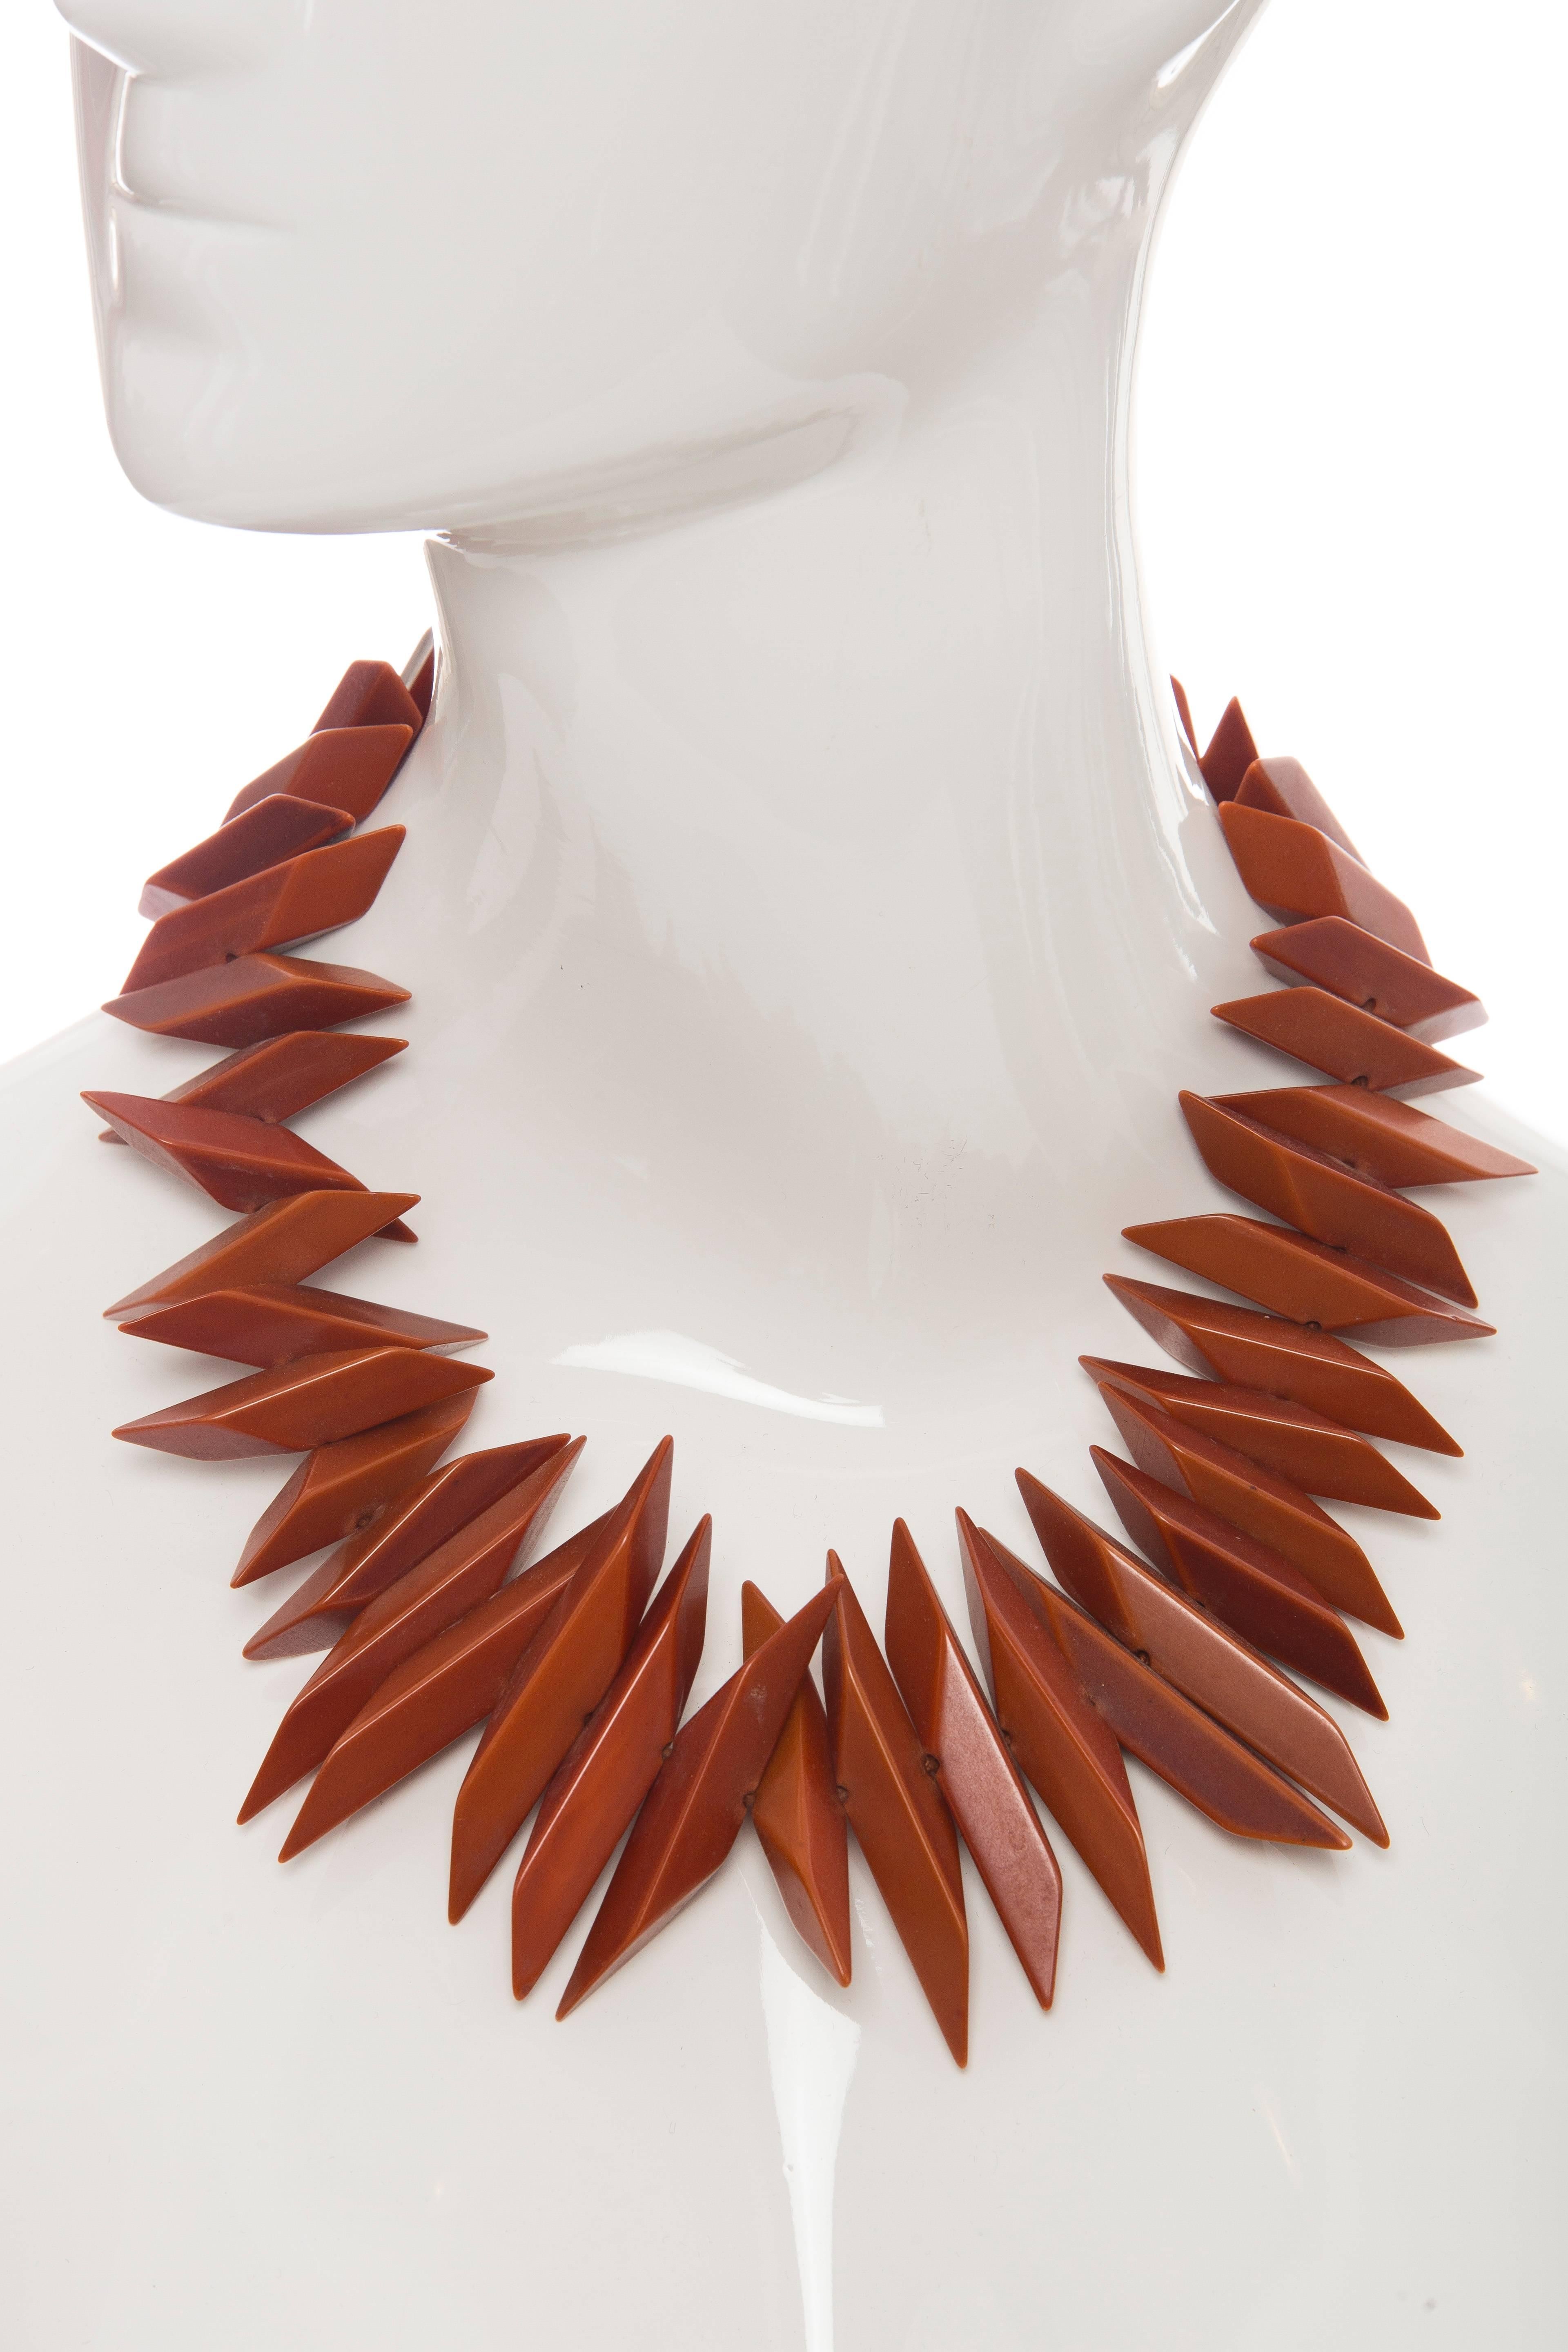 Geometric bakelite necklace, circa 1930's.

Measures: 20 inches end to end